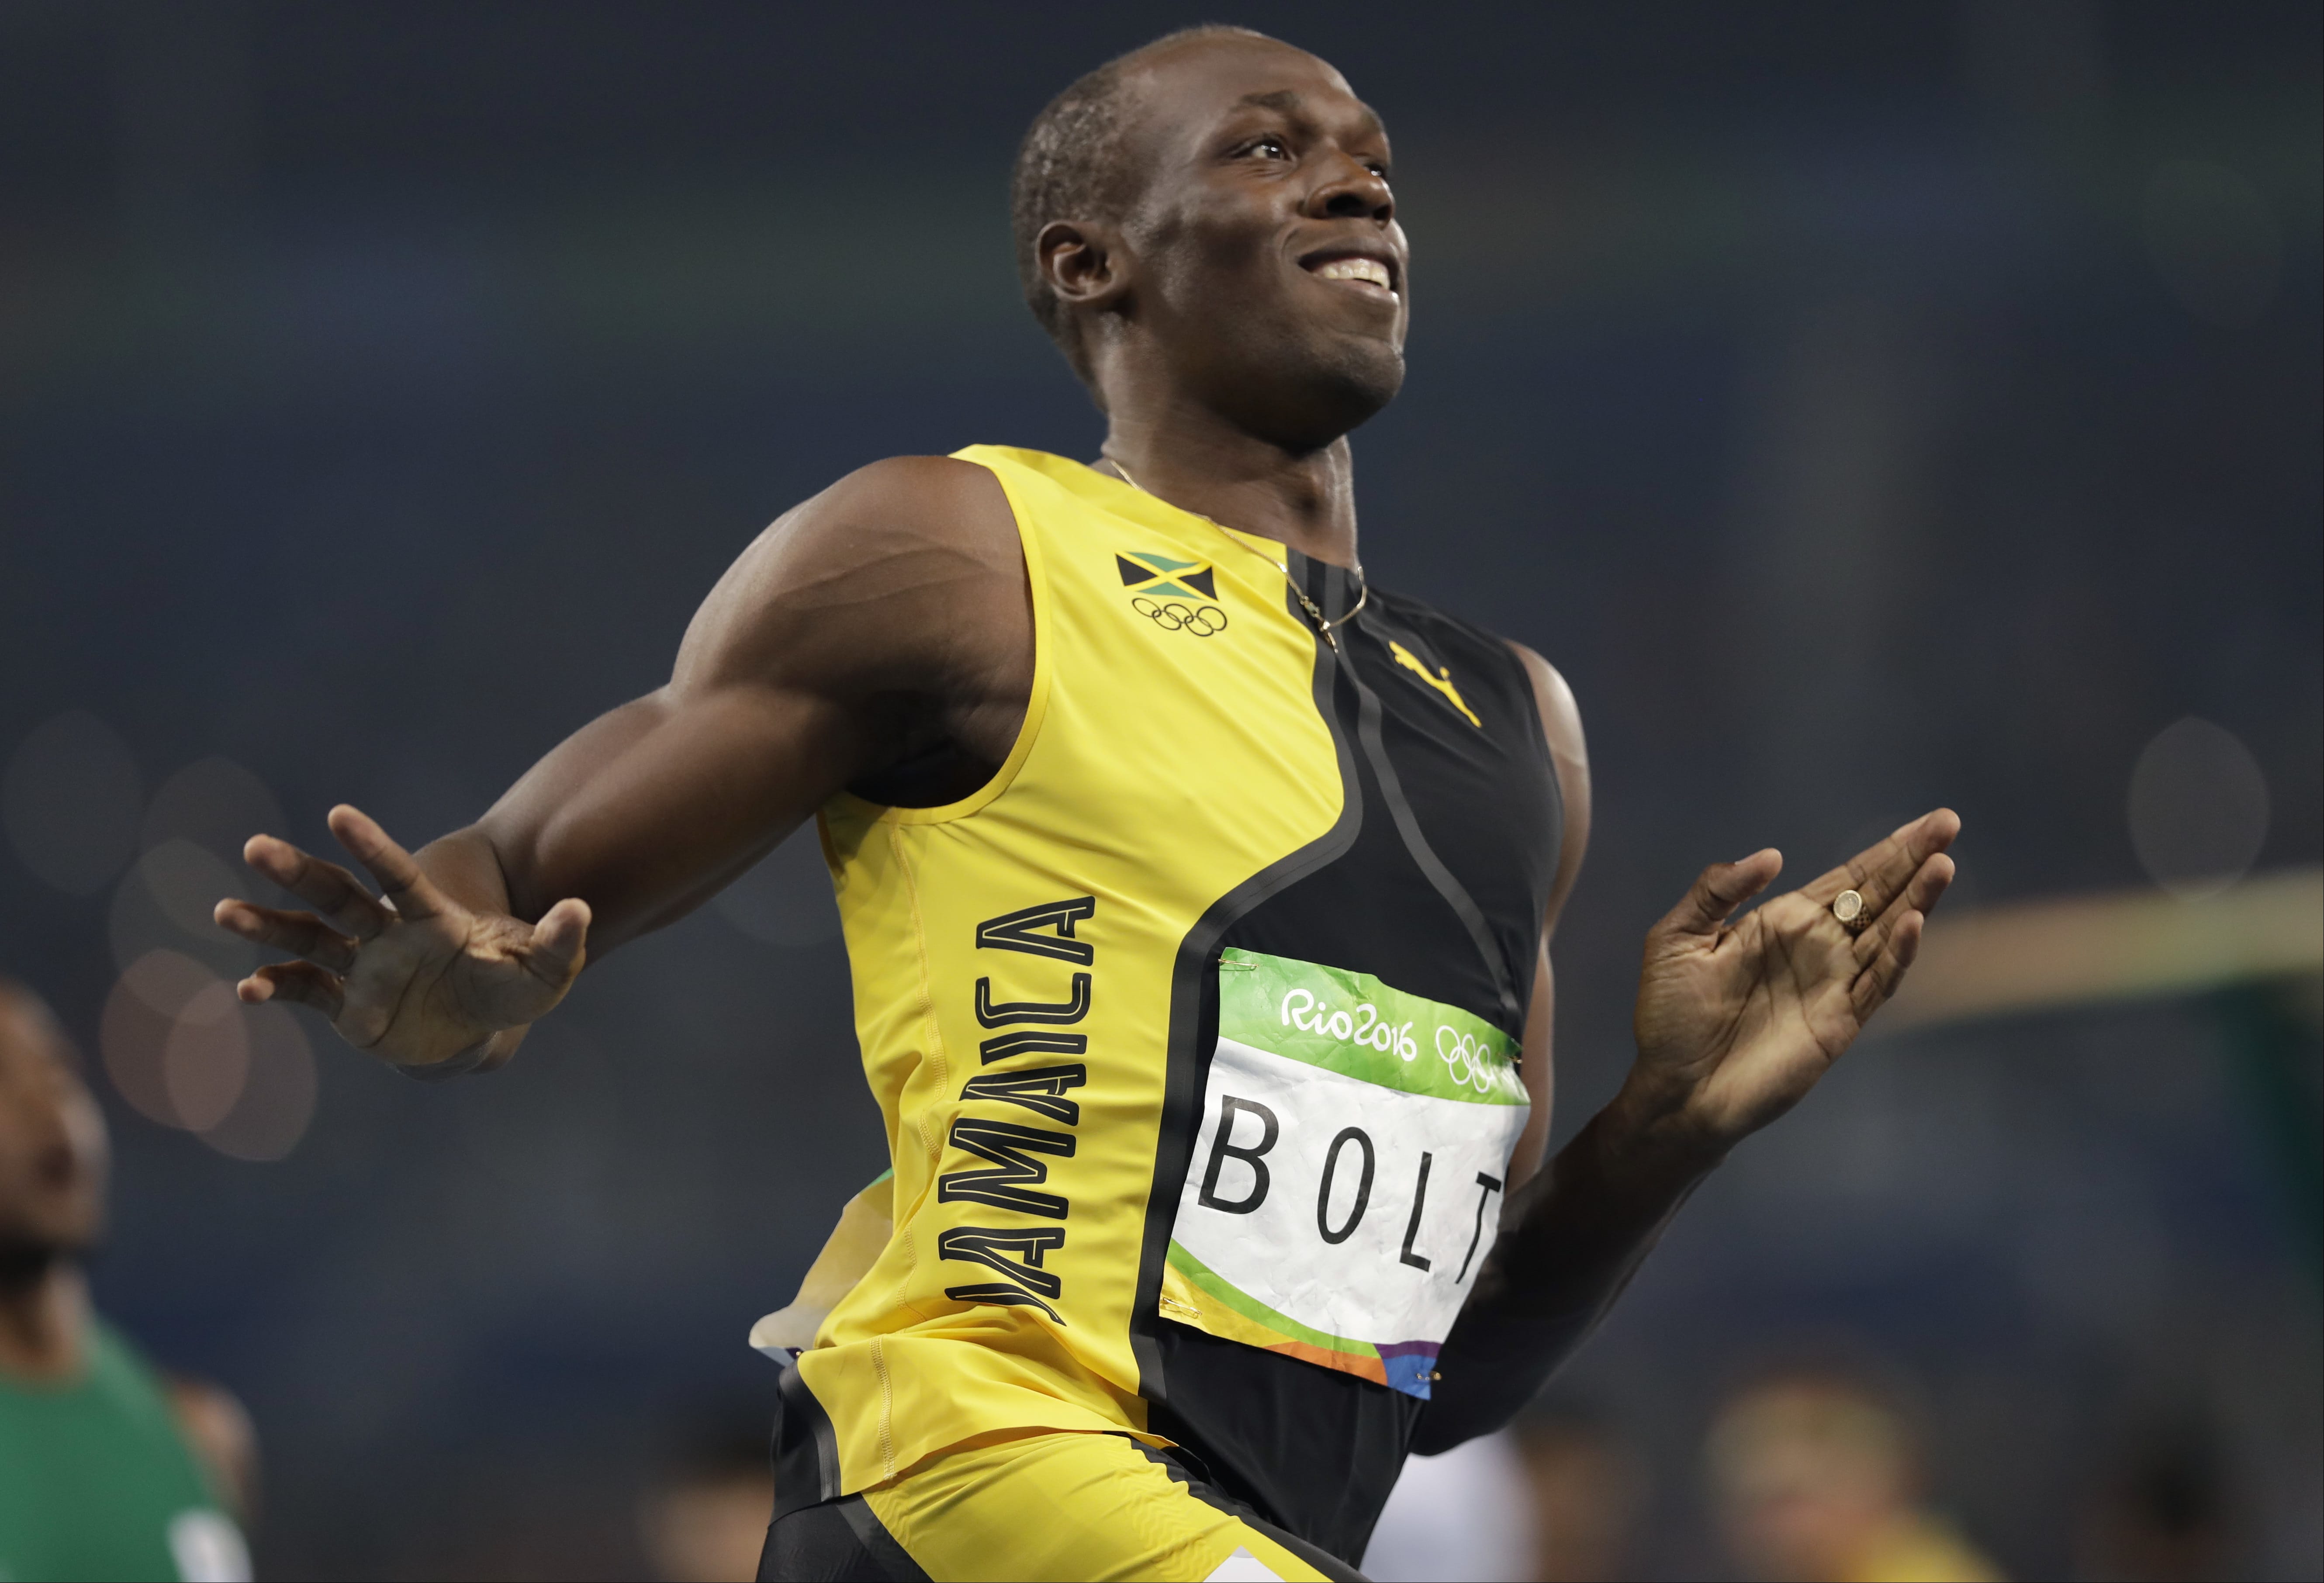 Jamaica's Usain Bolt wins the men's 100-meter final during the athletics competitions of the 2016 Summer Olympics at the Olympic stadium in Rio de Janeiro, Brazil, Sunday, Aug. 14, 2016. (AP Photo/David J.